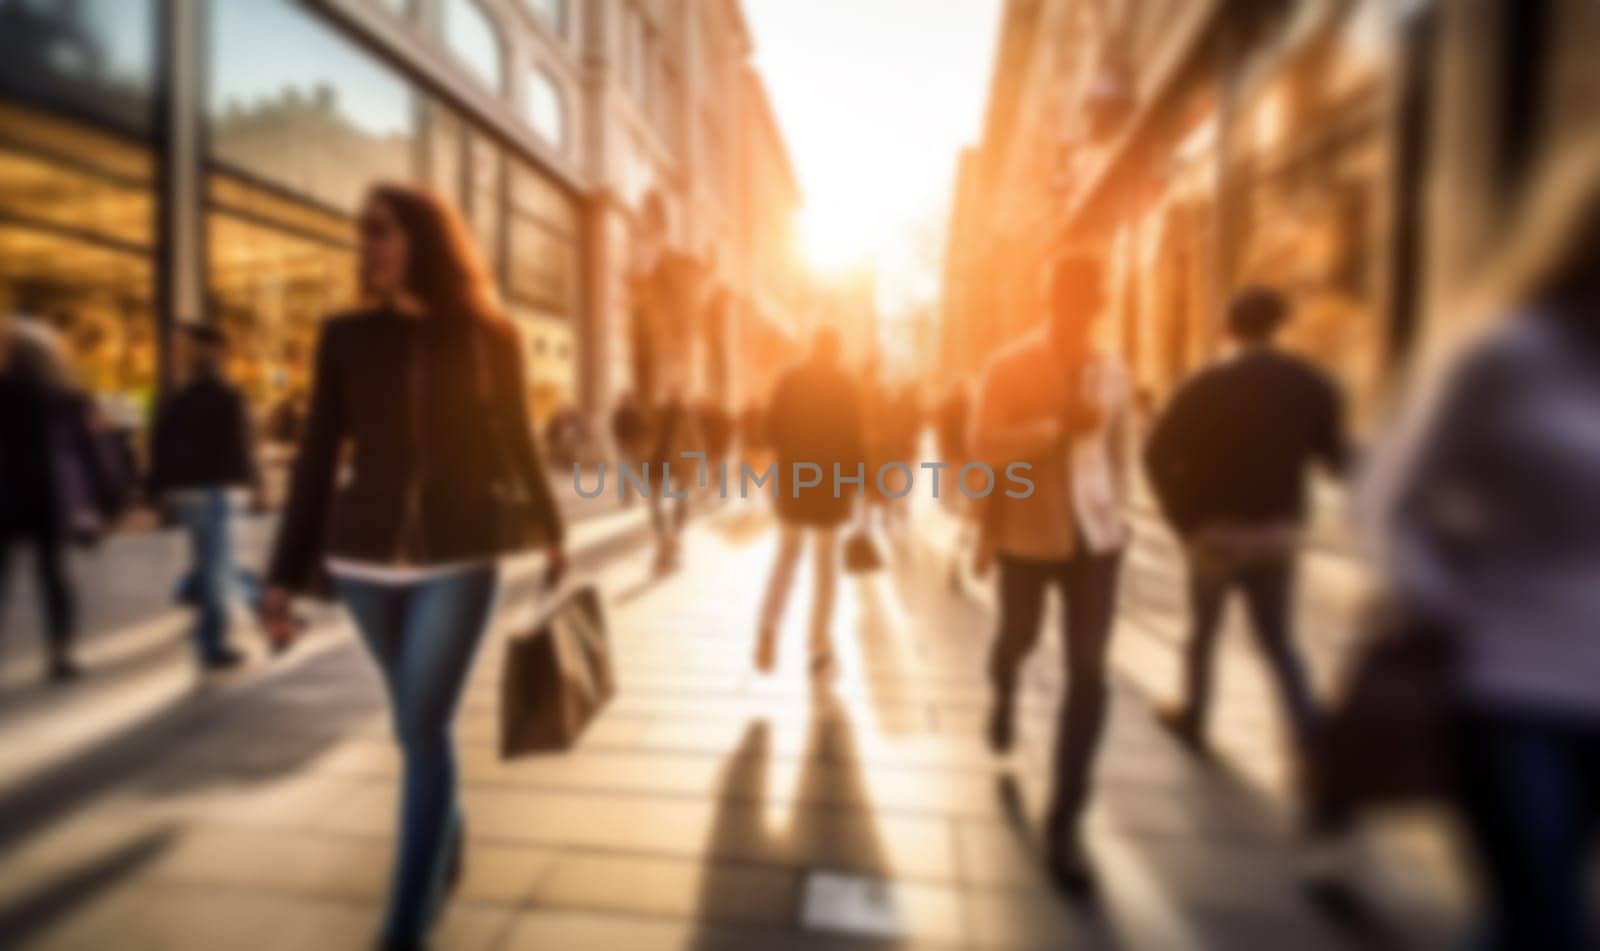 Busy shopping street in the city. Rush hour. Motion blurred crowd of shopping walking on busy fashion shop street. Crowd of people shoppers walking in the streets blurred background by Annebel146